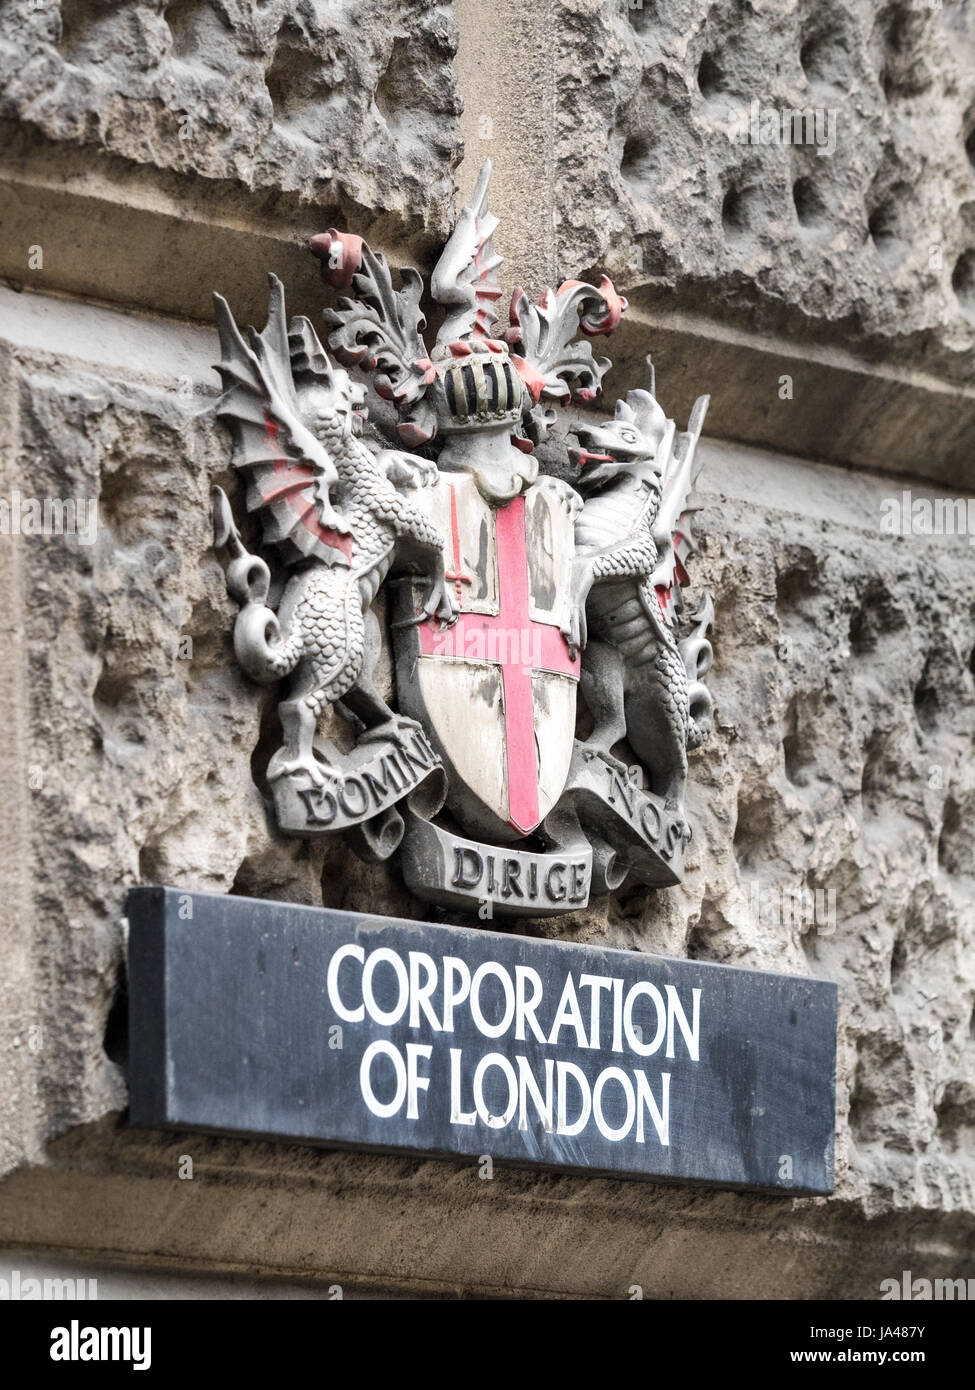 Crest of the Corporation of London on a building in London's financial district known as the City of London or Square Mile Stock Photo